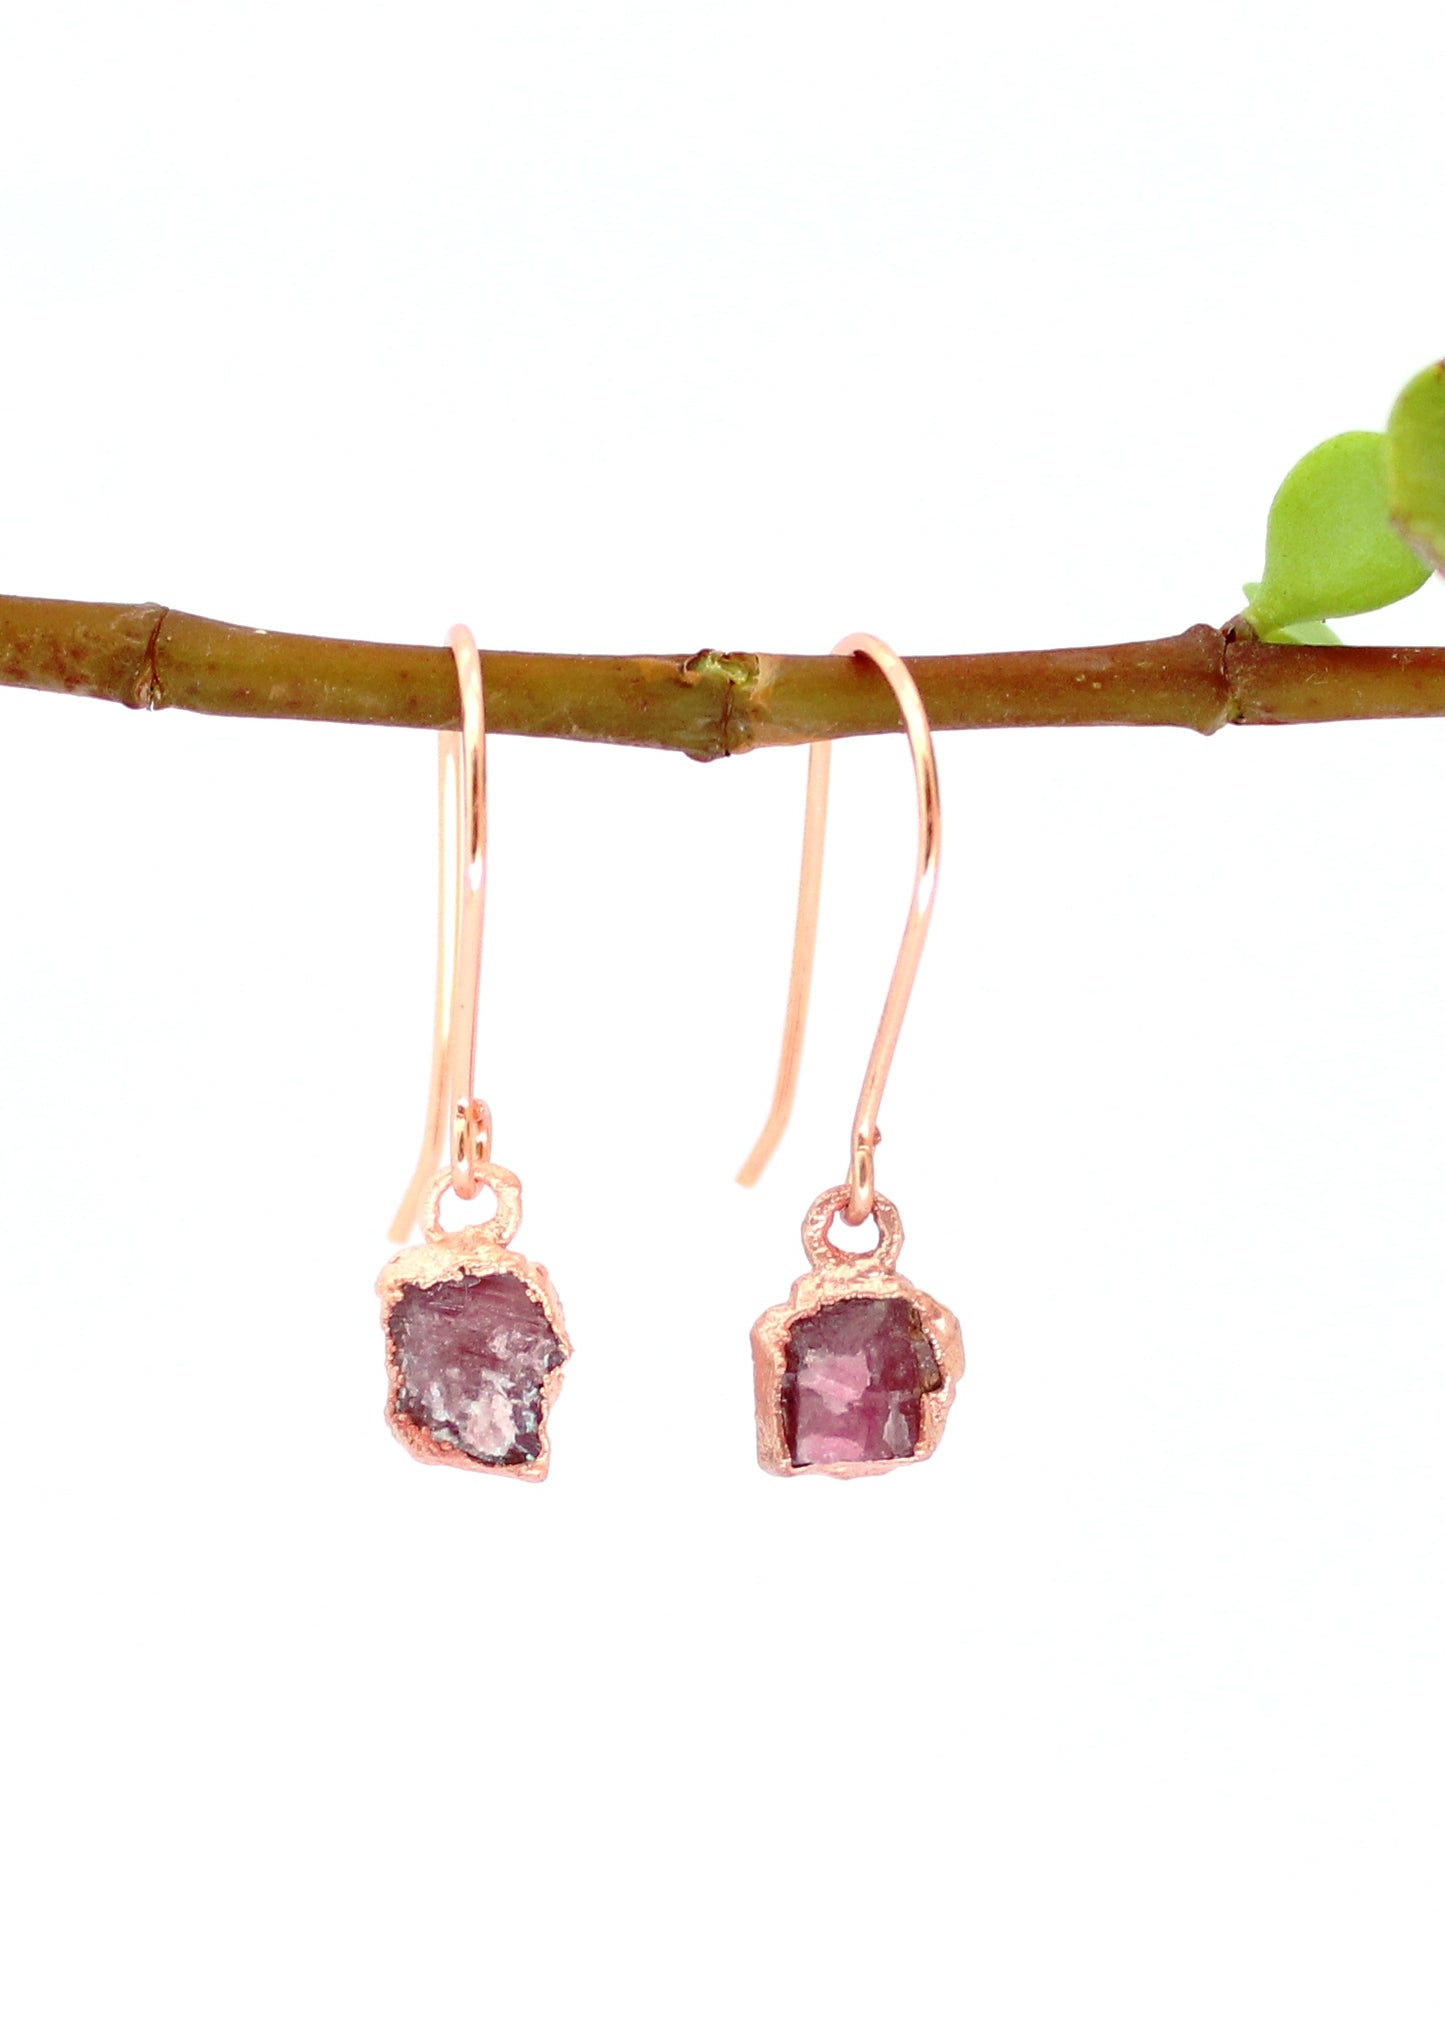 Small Pink Tourmaline Short Dangly Earrings (October Birthstone)